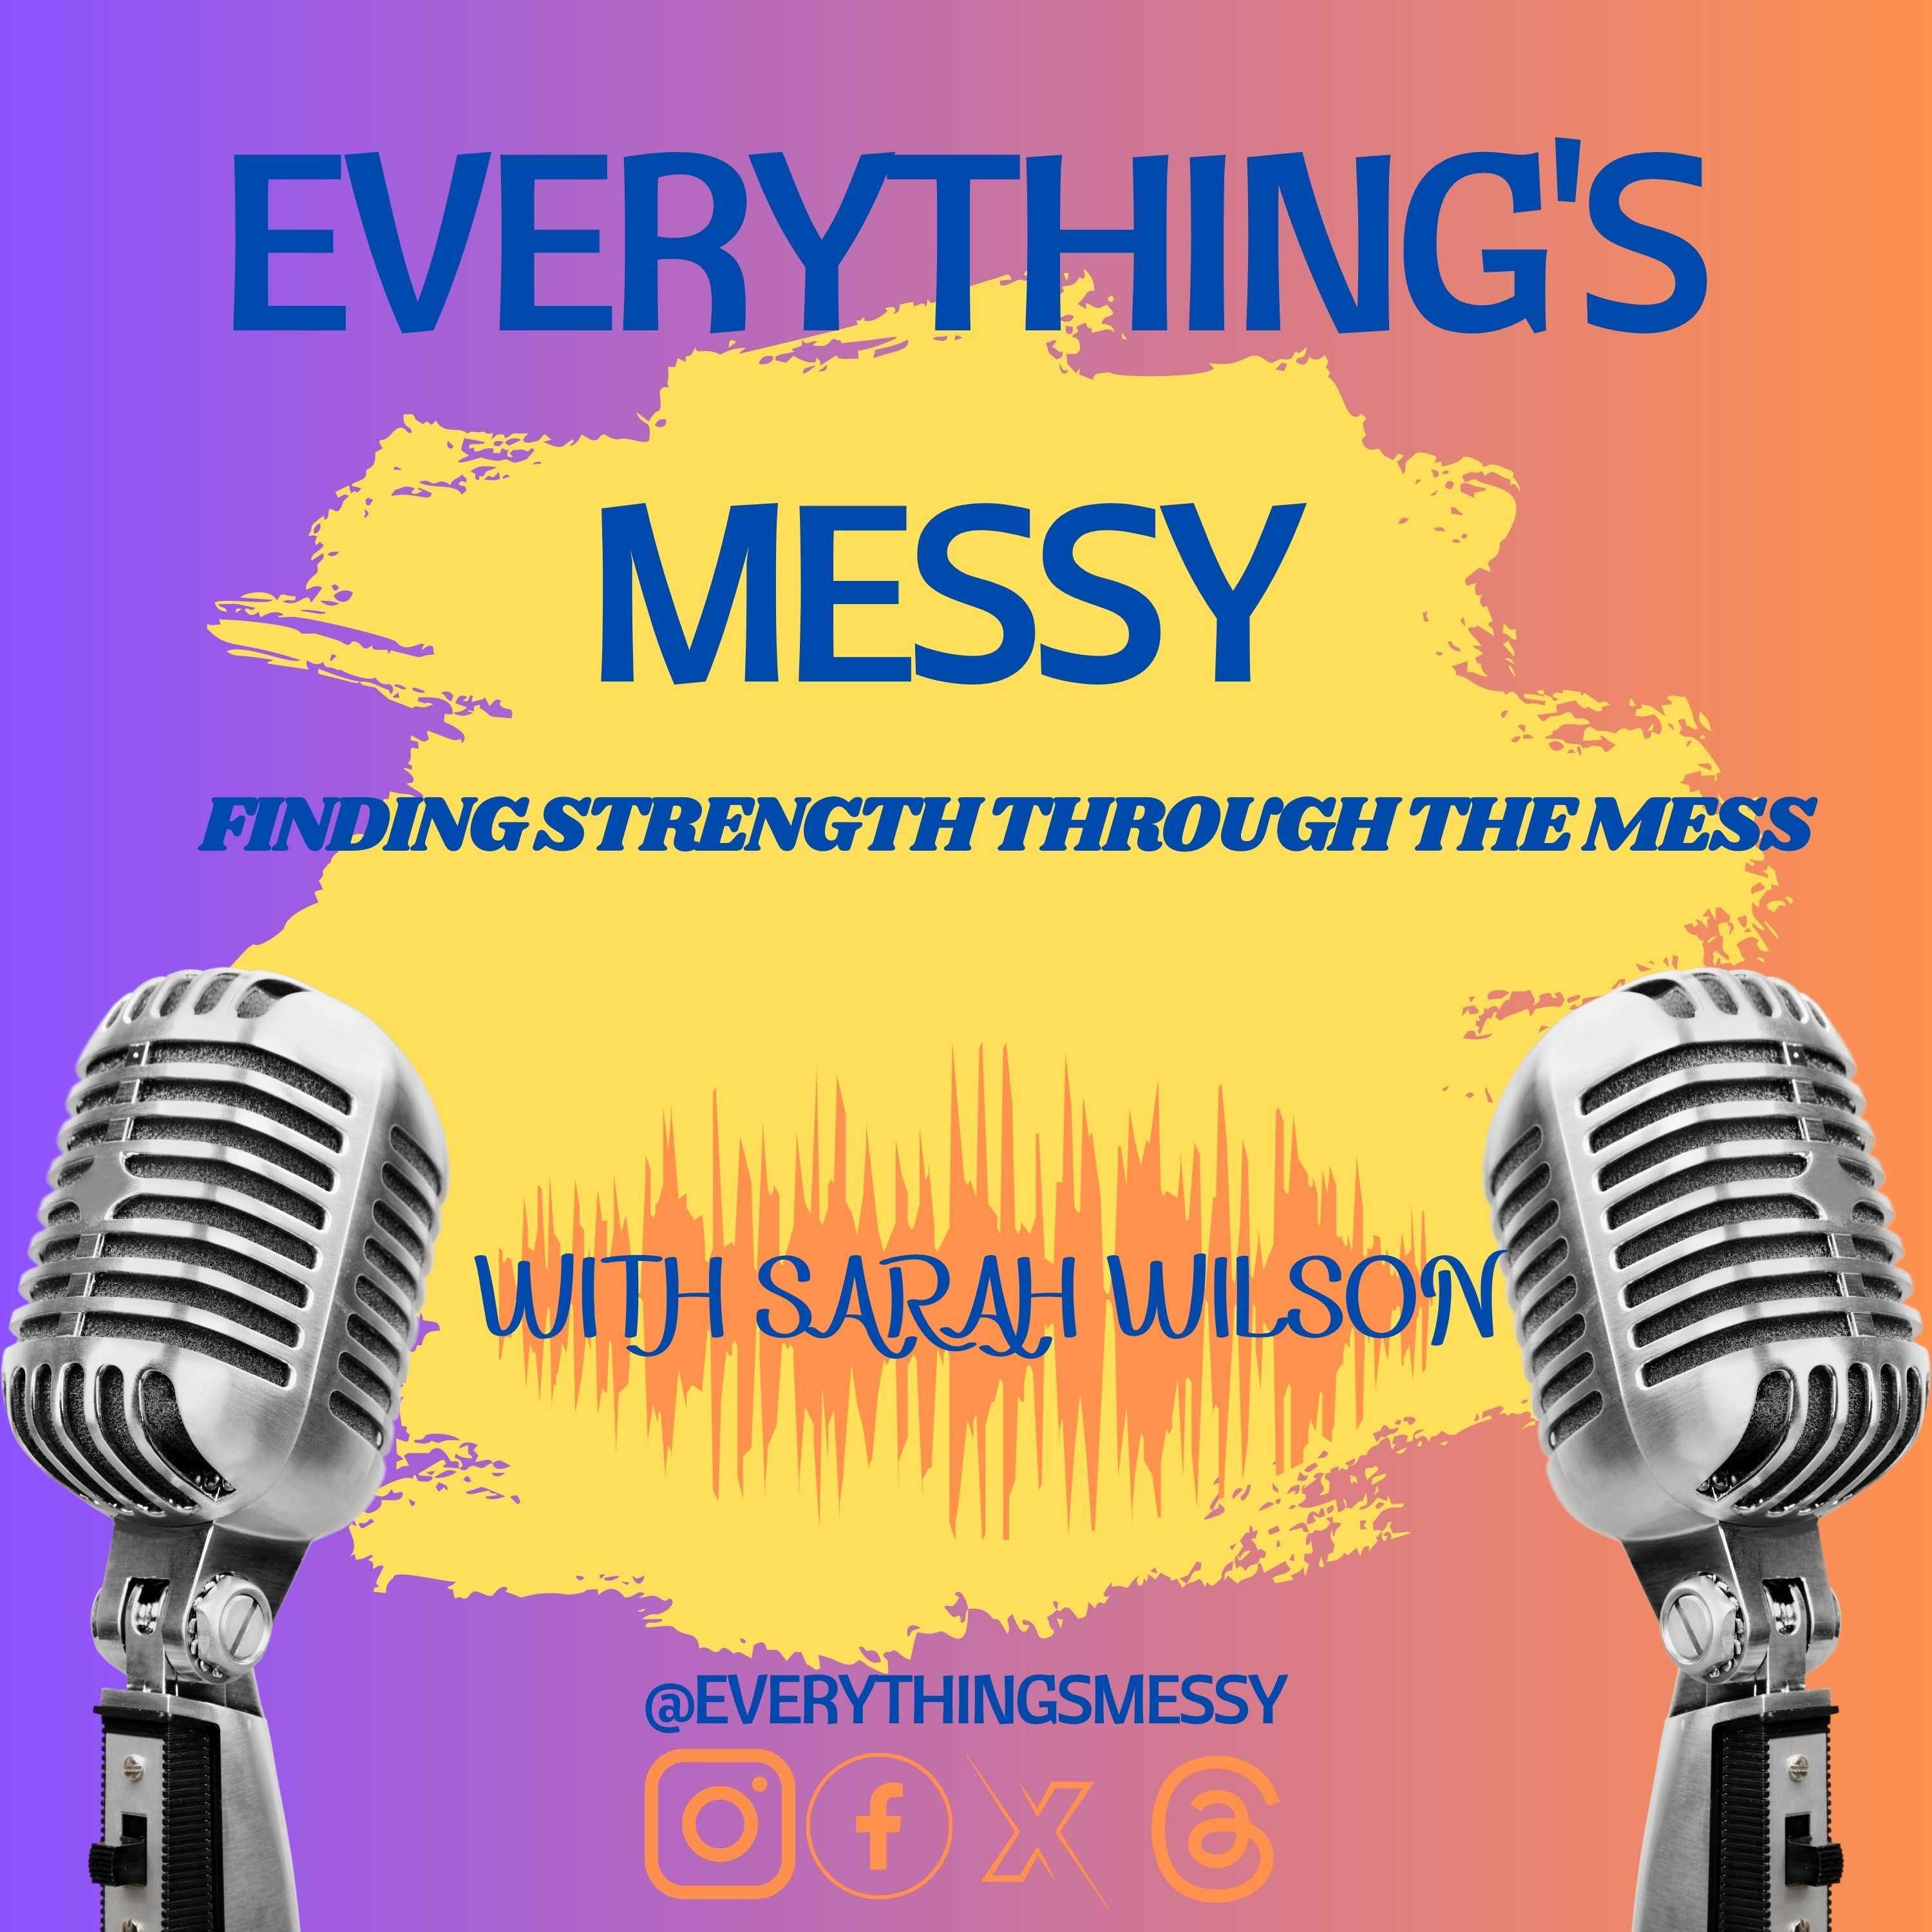 Everything's Messy Trailer